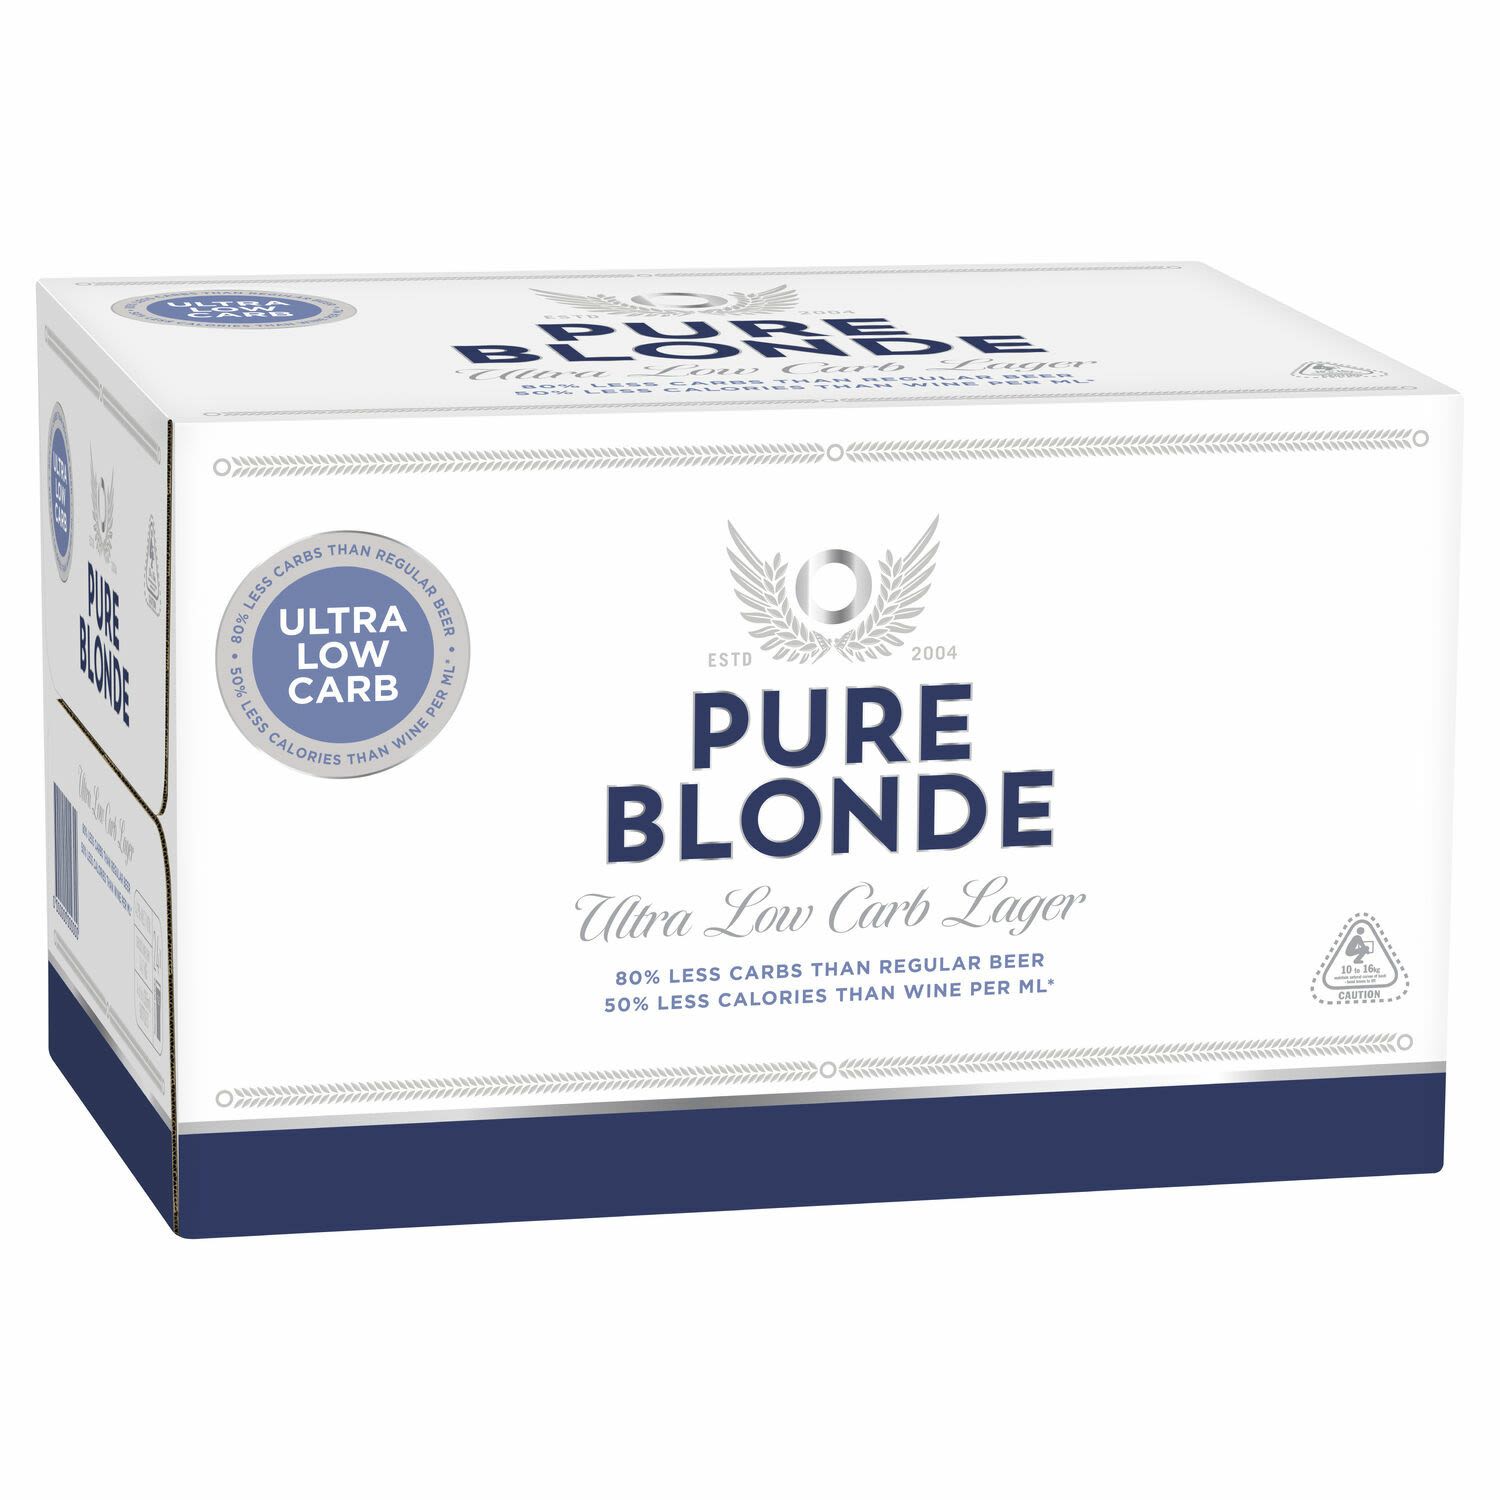 Australia's leading low carbohydrate beer and for obvious reasons. Pure Blonde is a crisp, clean, easy drinking beer that delivers refreshment while looking after the waistline.<br /> <br />Alcohol Volume: 4.60%<br /><br />Pack Format: 24 Pack<br /><br />Standard Drinks: 1.3<br /><br />Pack Type: Bottle<br /><br />Country of Origin: Australia<br />